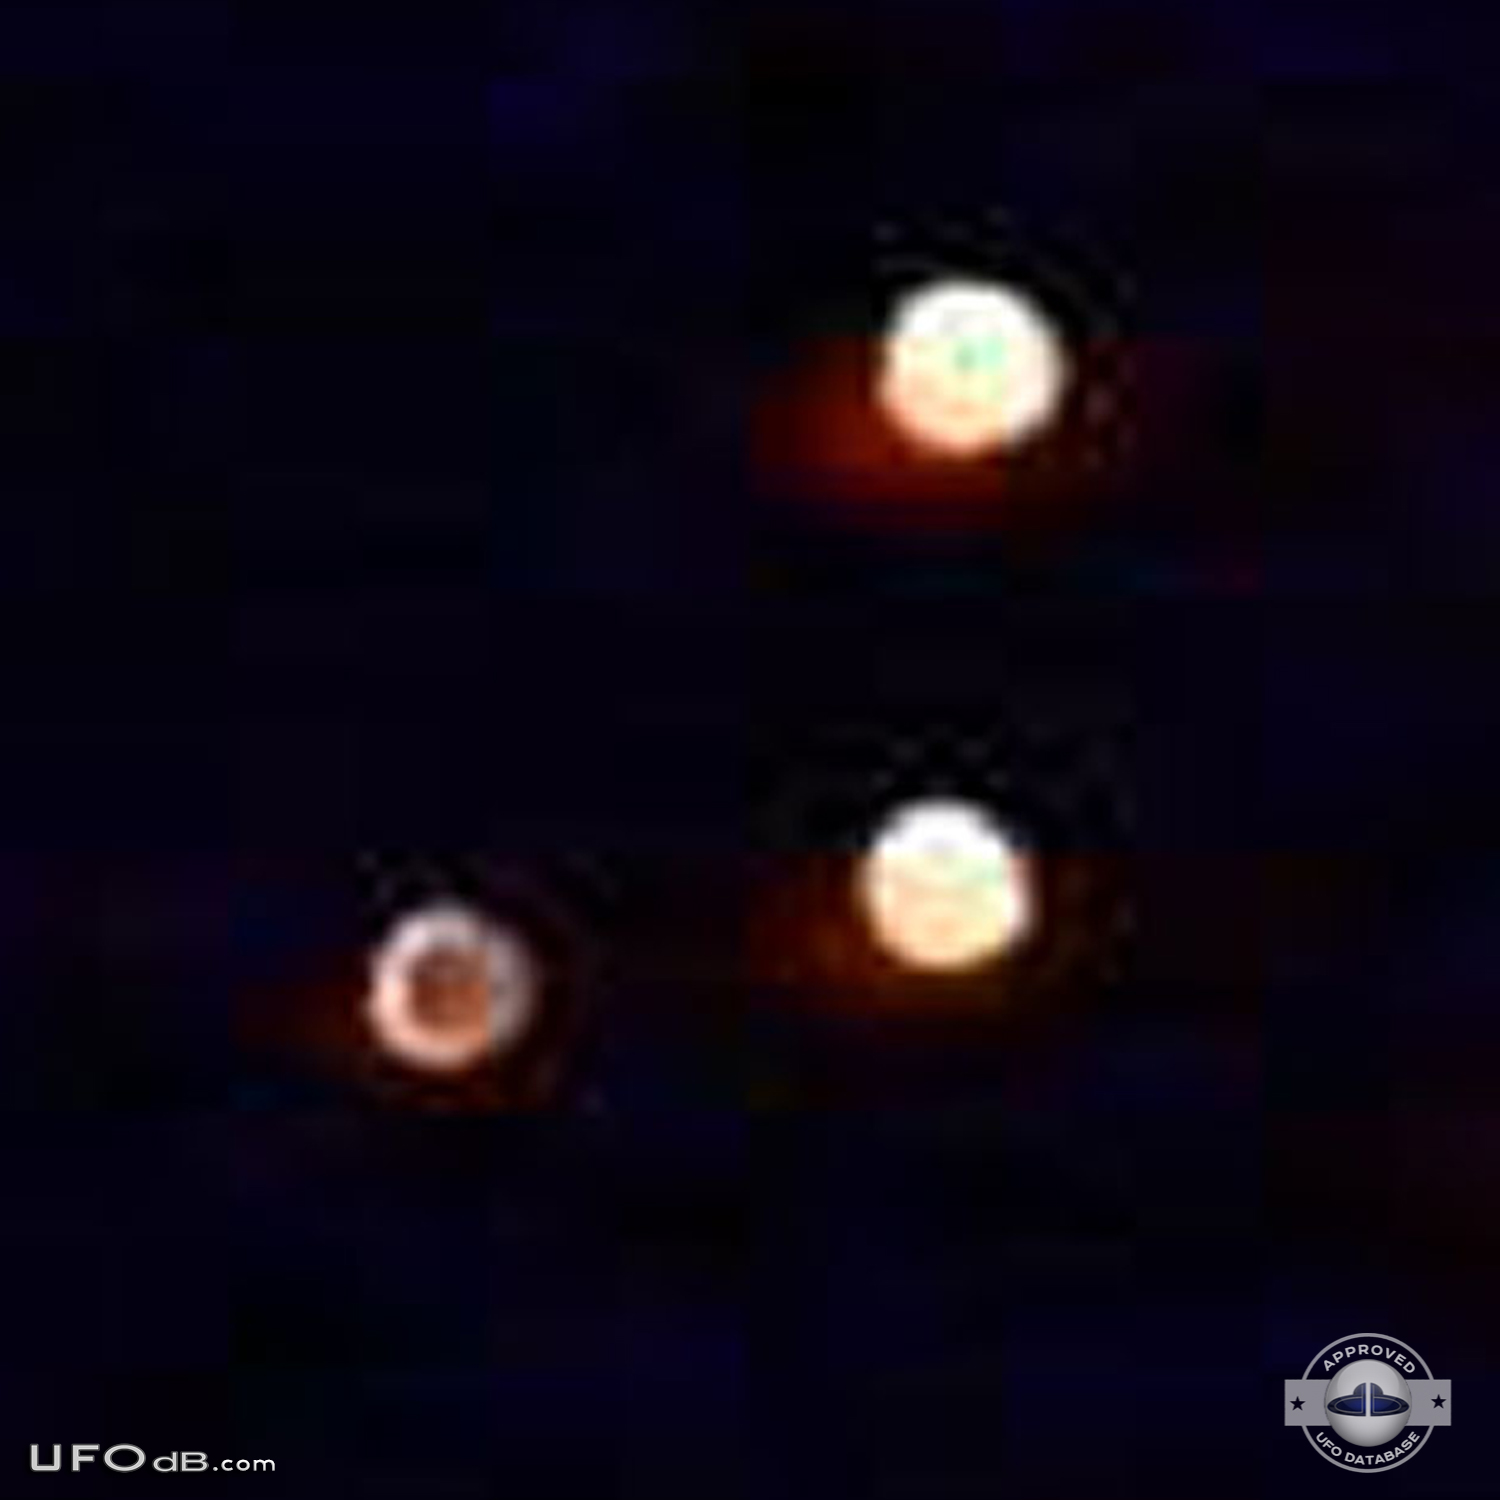 Strange trio of spherical UFOs caught on photo over Israel - 1992 UFO Picture #402-3